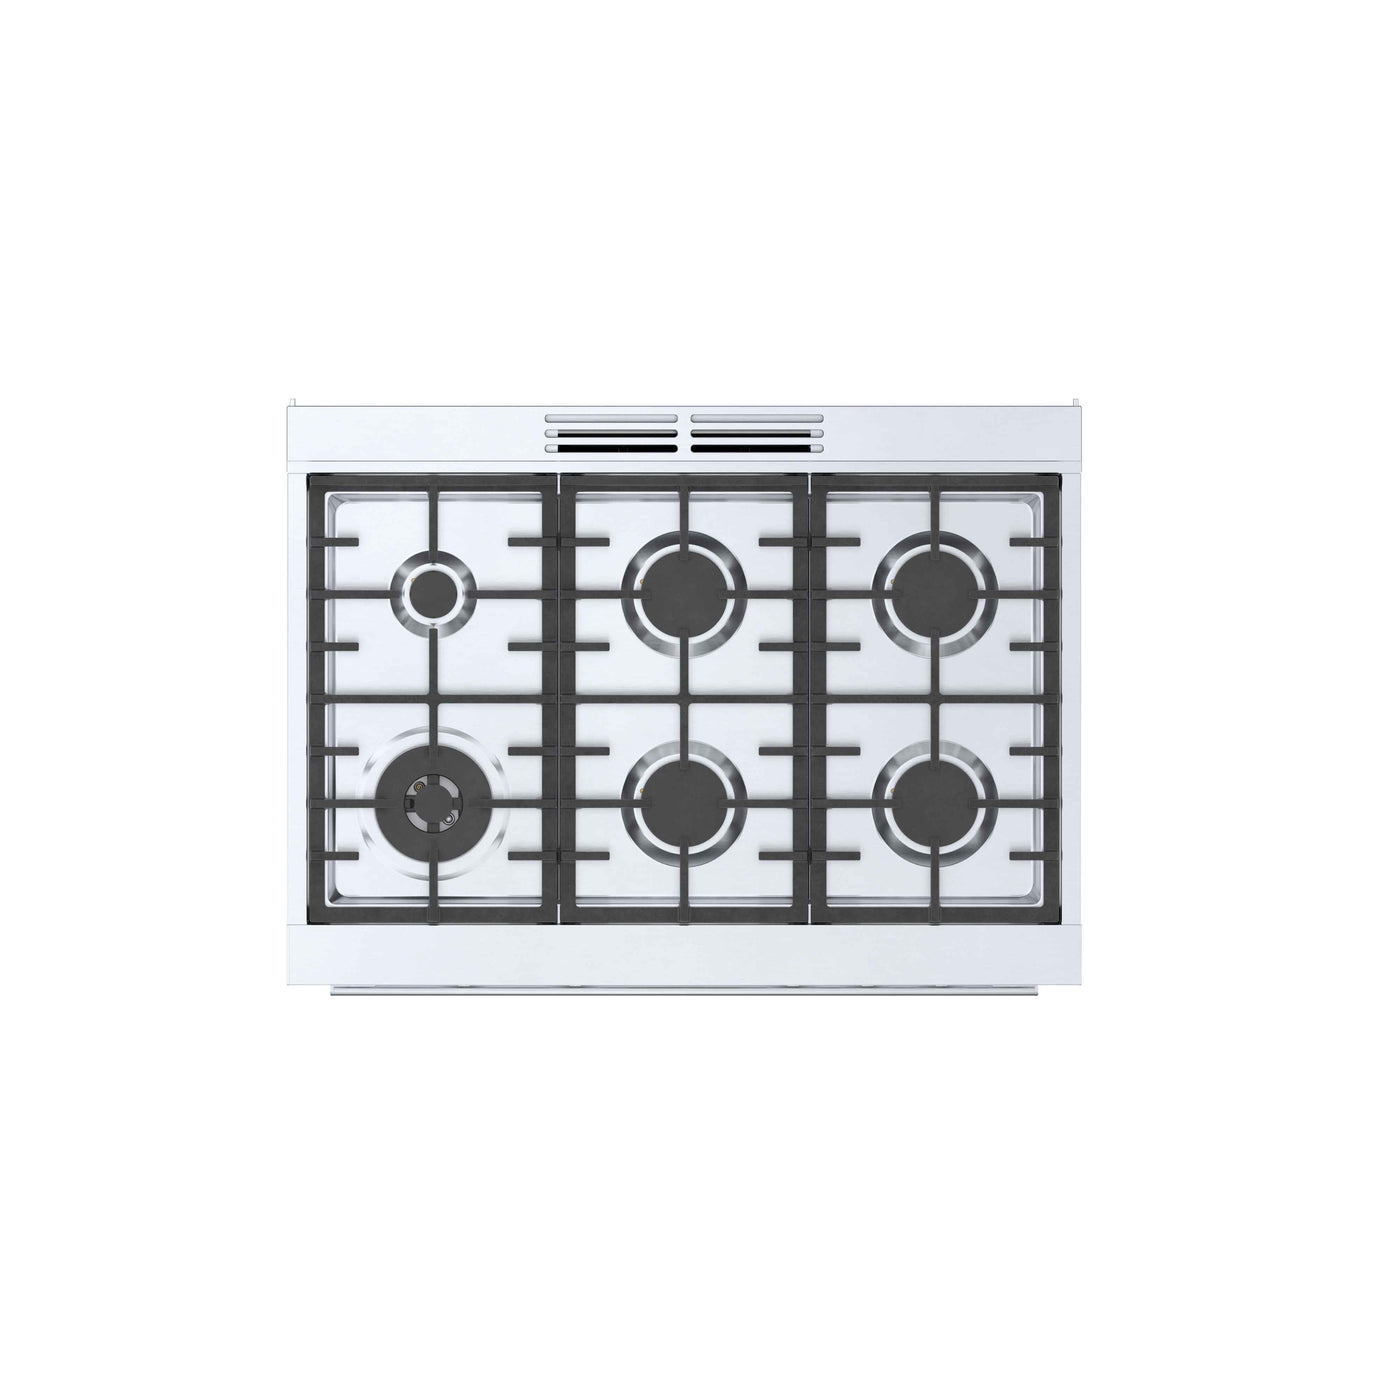 Bosch 36" Industrial Style Gas Range Stainless Steel - HGS8655UC